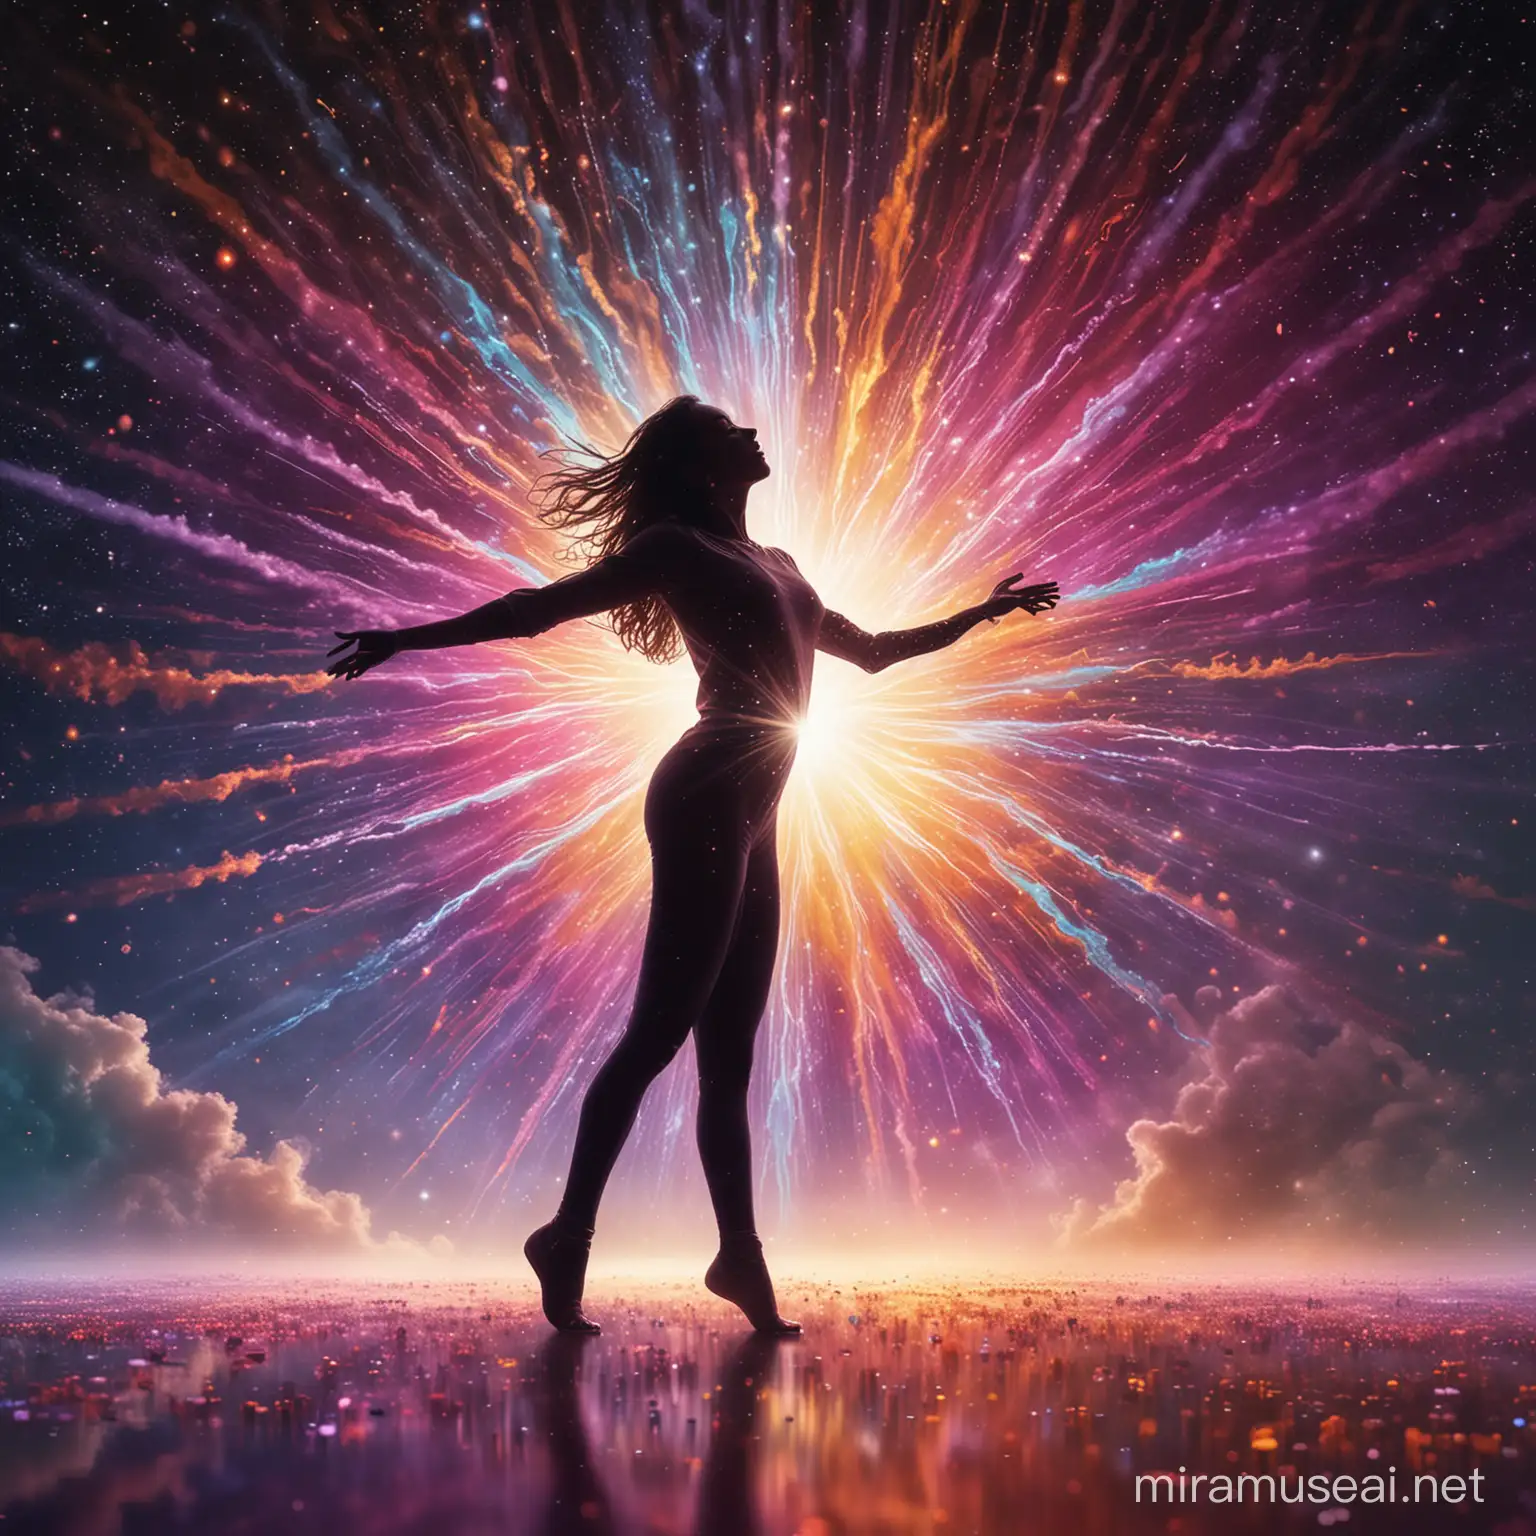 Create a dynamic album artwork featuring a silhouette of a person dancing amidst a cosmic explosion of light and energy bursting forth from a seedling, with that ethereal figure floating above a reflective surface of a vibrant, swirling vortex of colors emanating from a central point